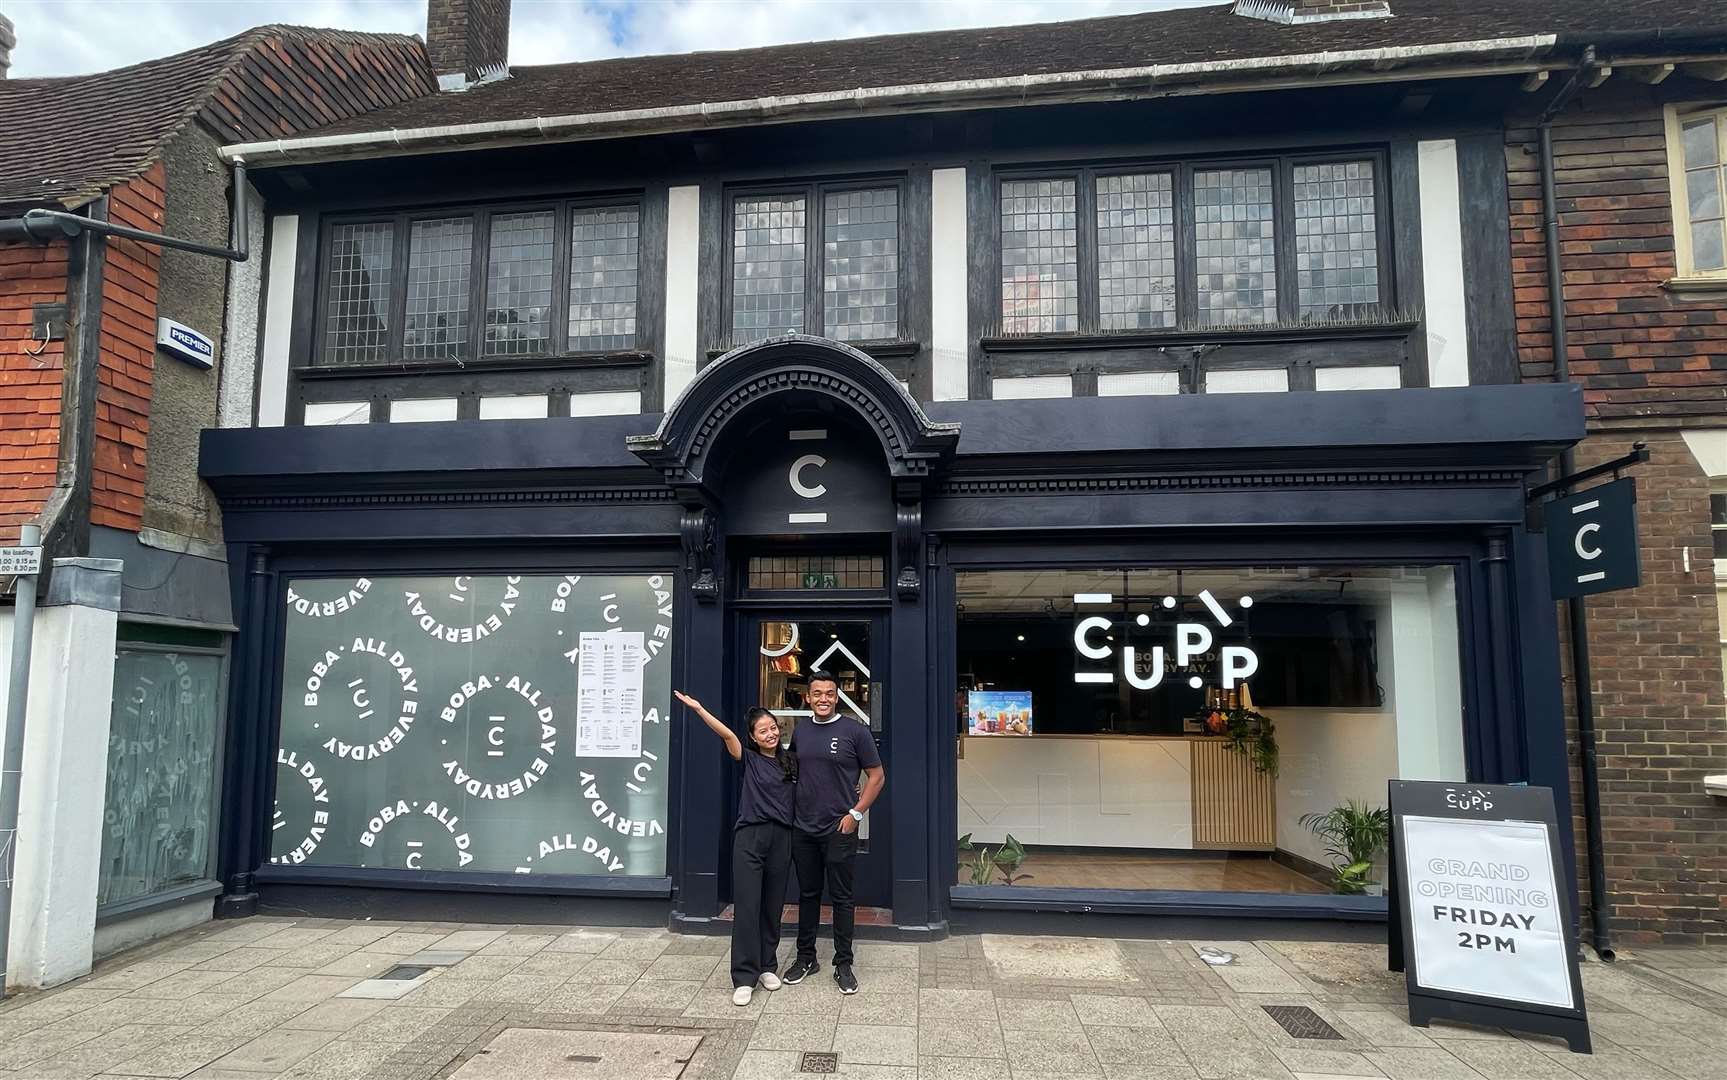 Jenny and Younnis Abbad-Andaloussi have launched their first CUPP Bubble Tea store